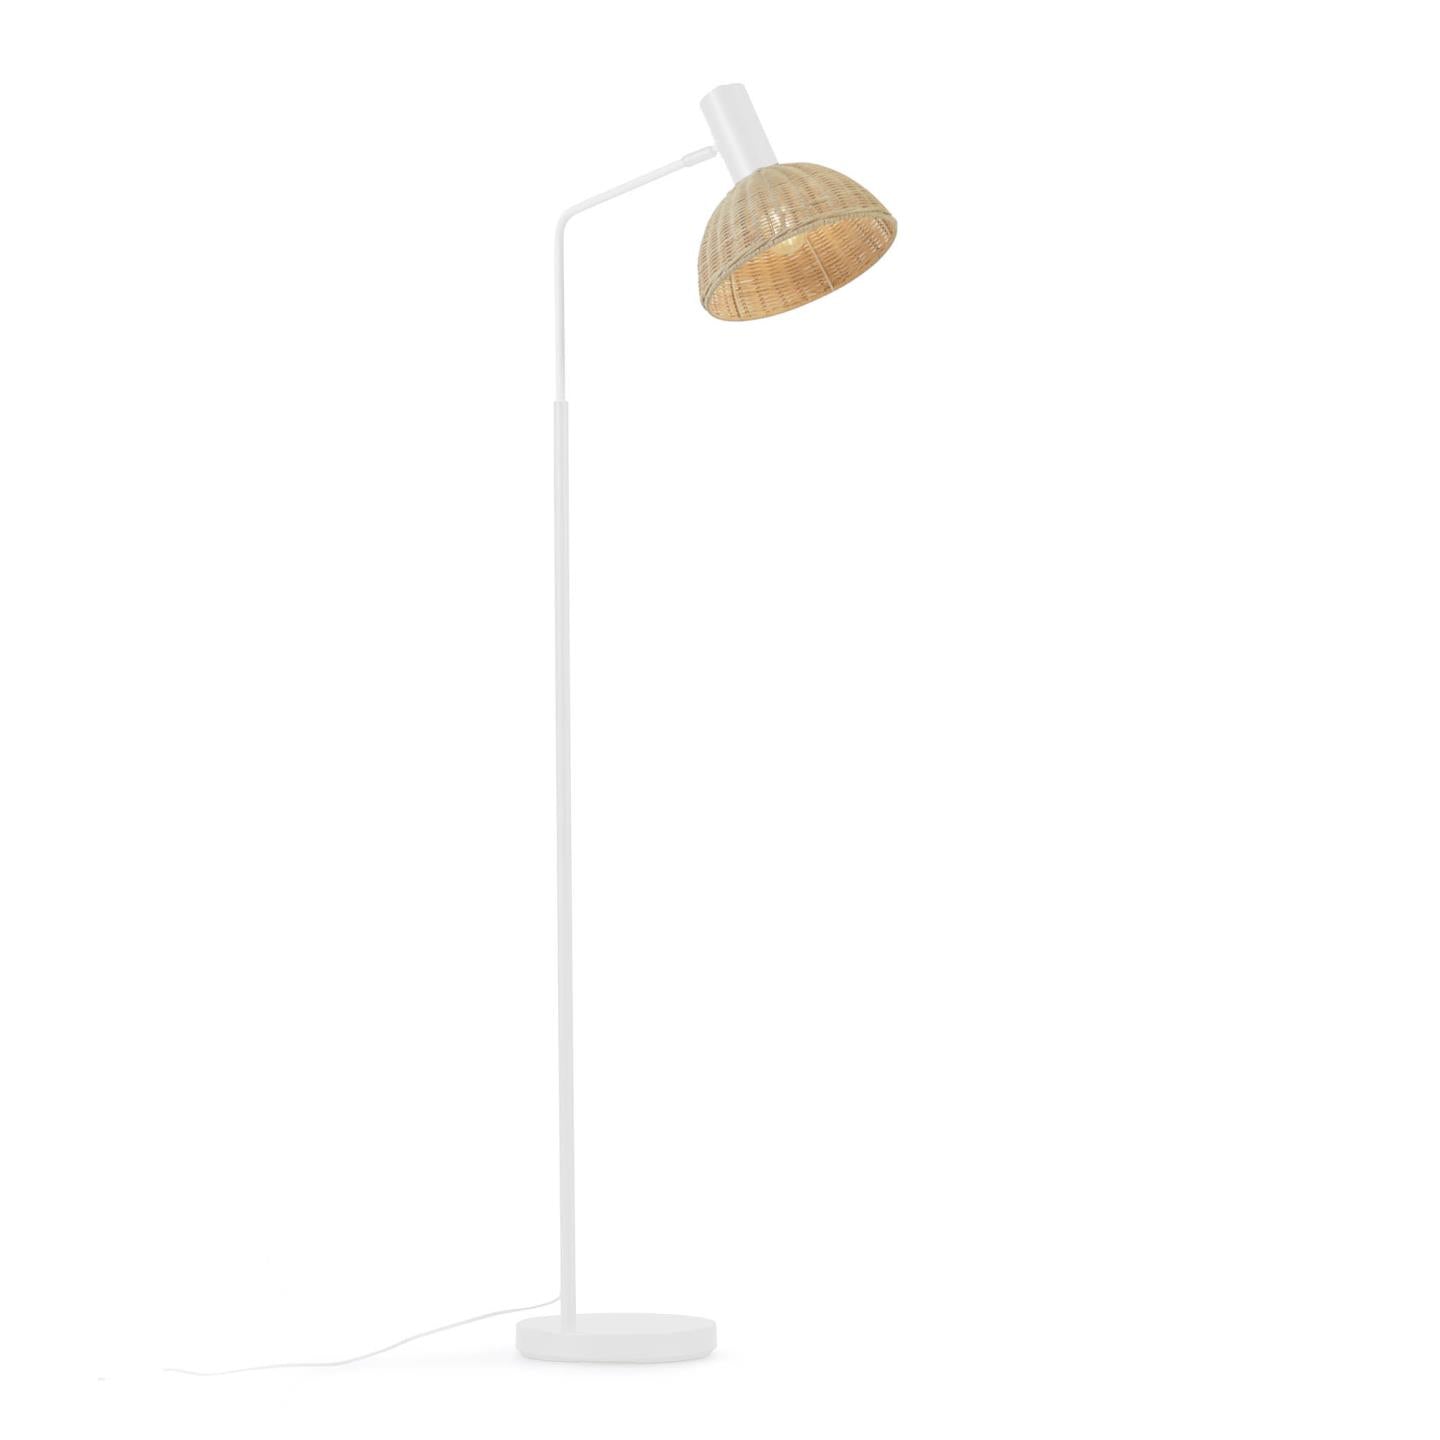 Damila floor lamp in metal with white finish and rattan with natural finish